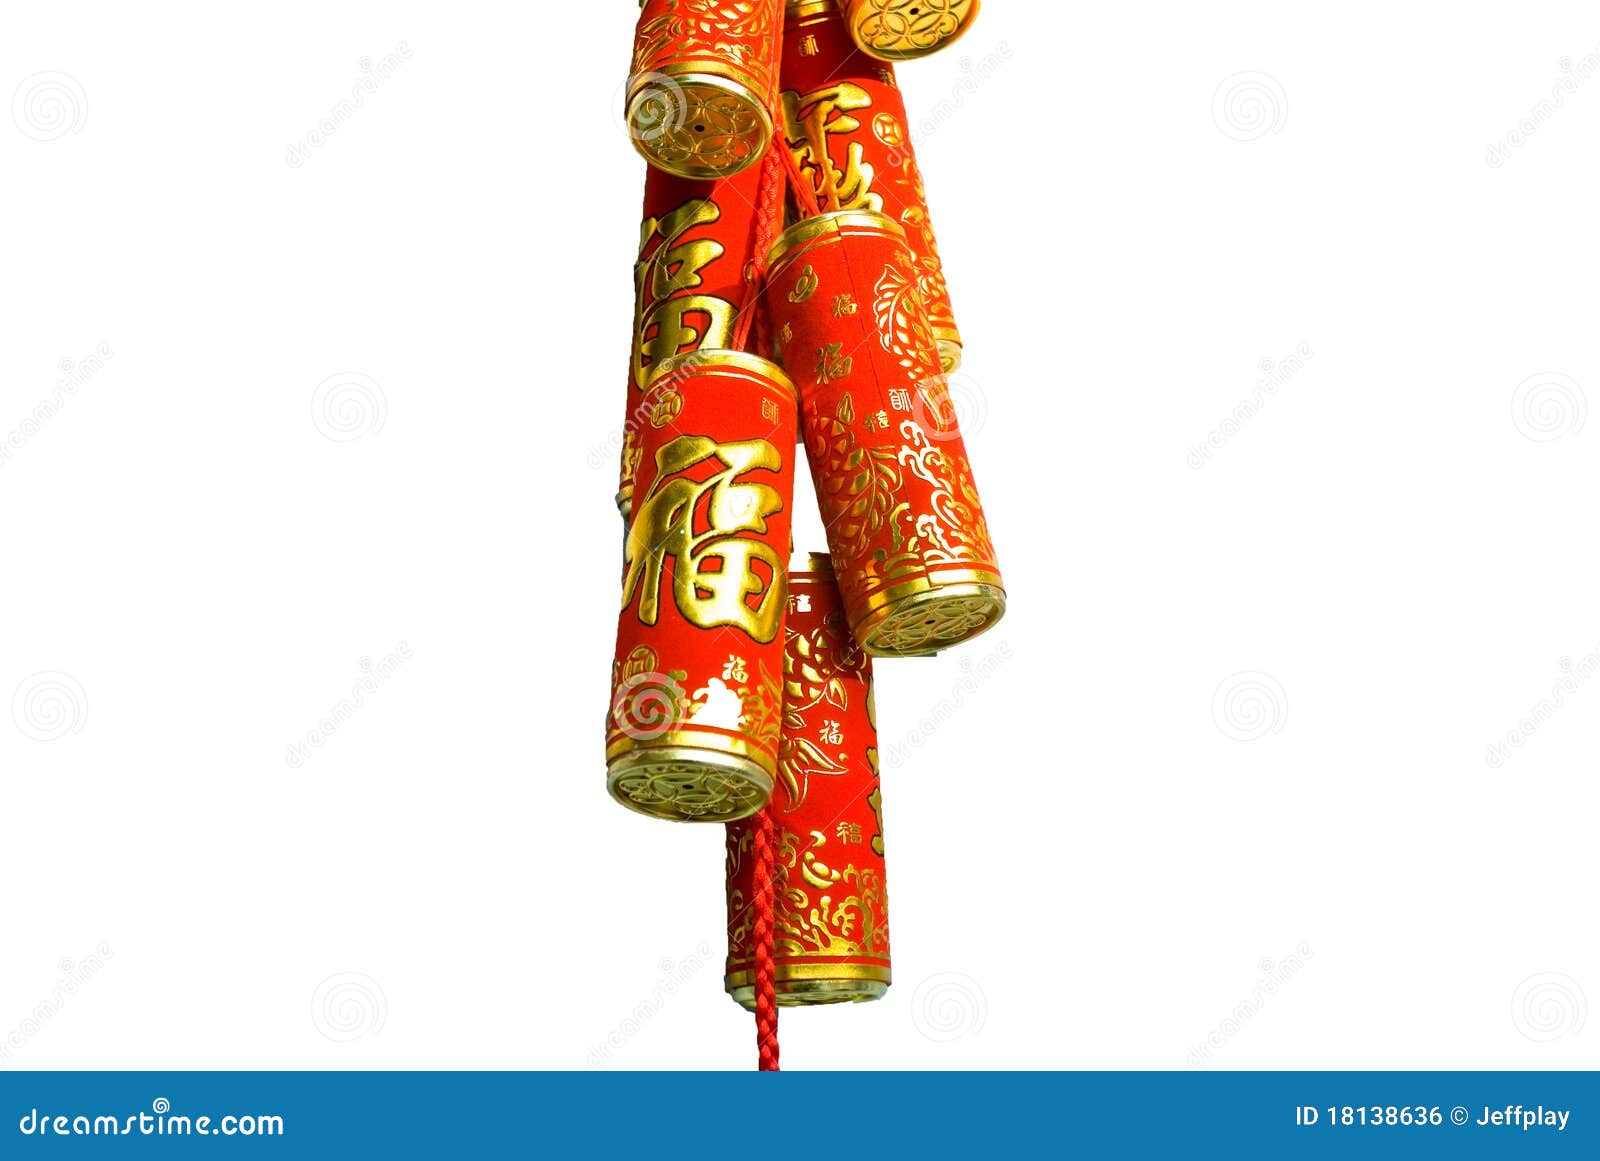 Firecracker Of The Chinese New Year Royalty Free Stock Image - Image: 181386361300 x 960